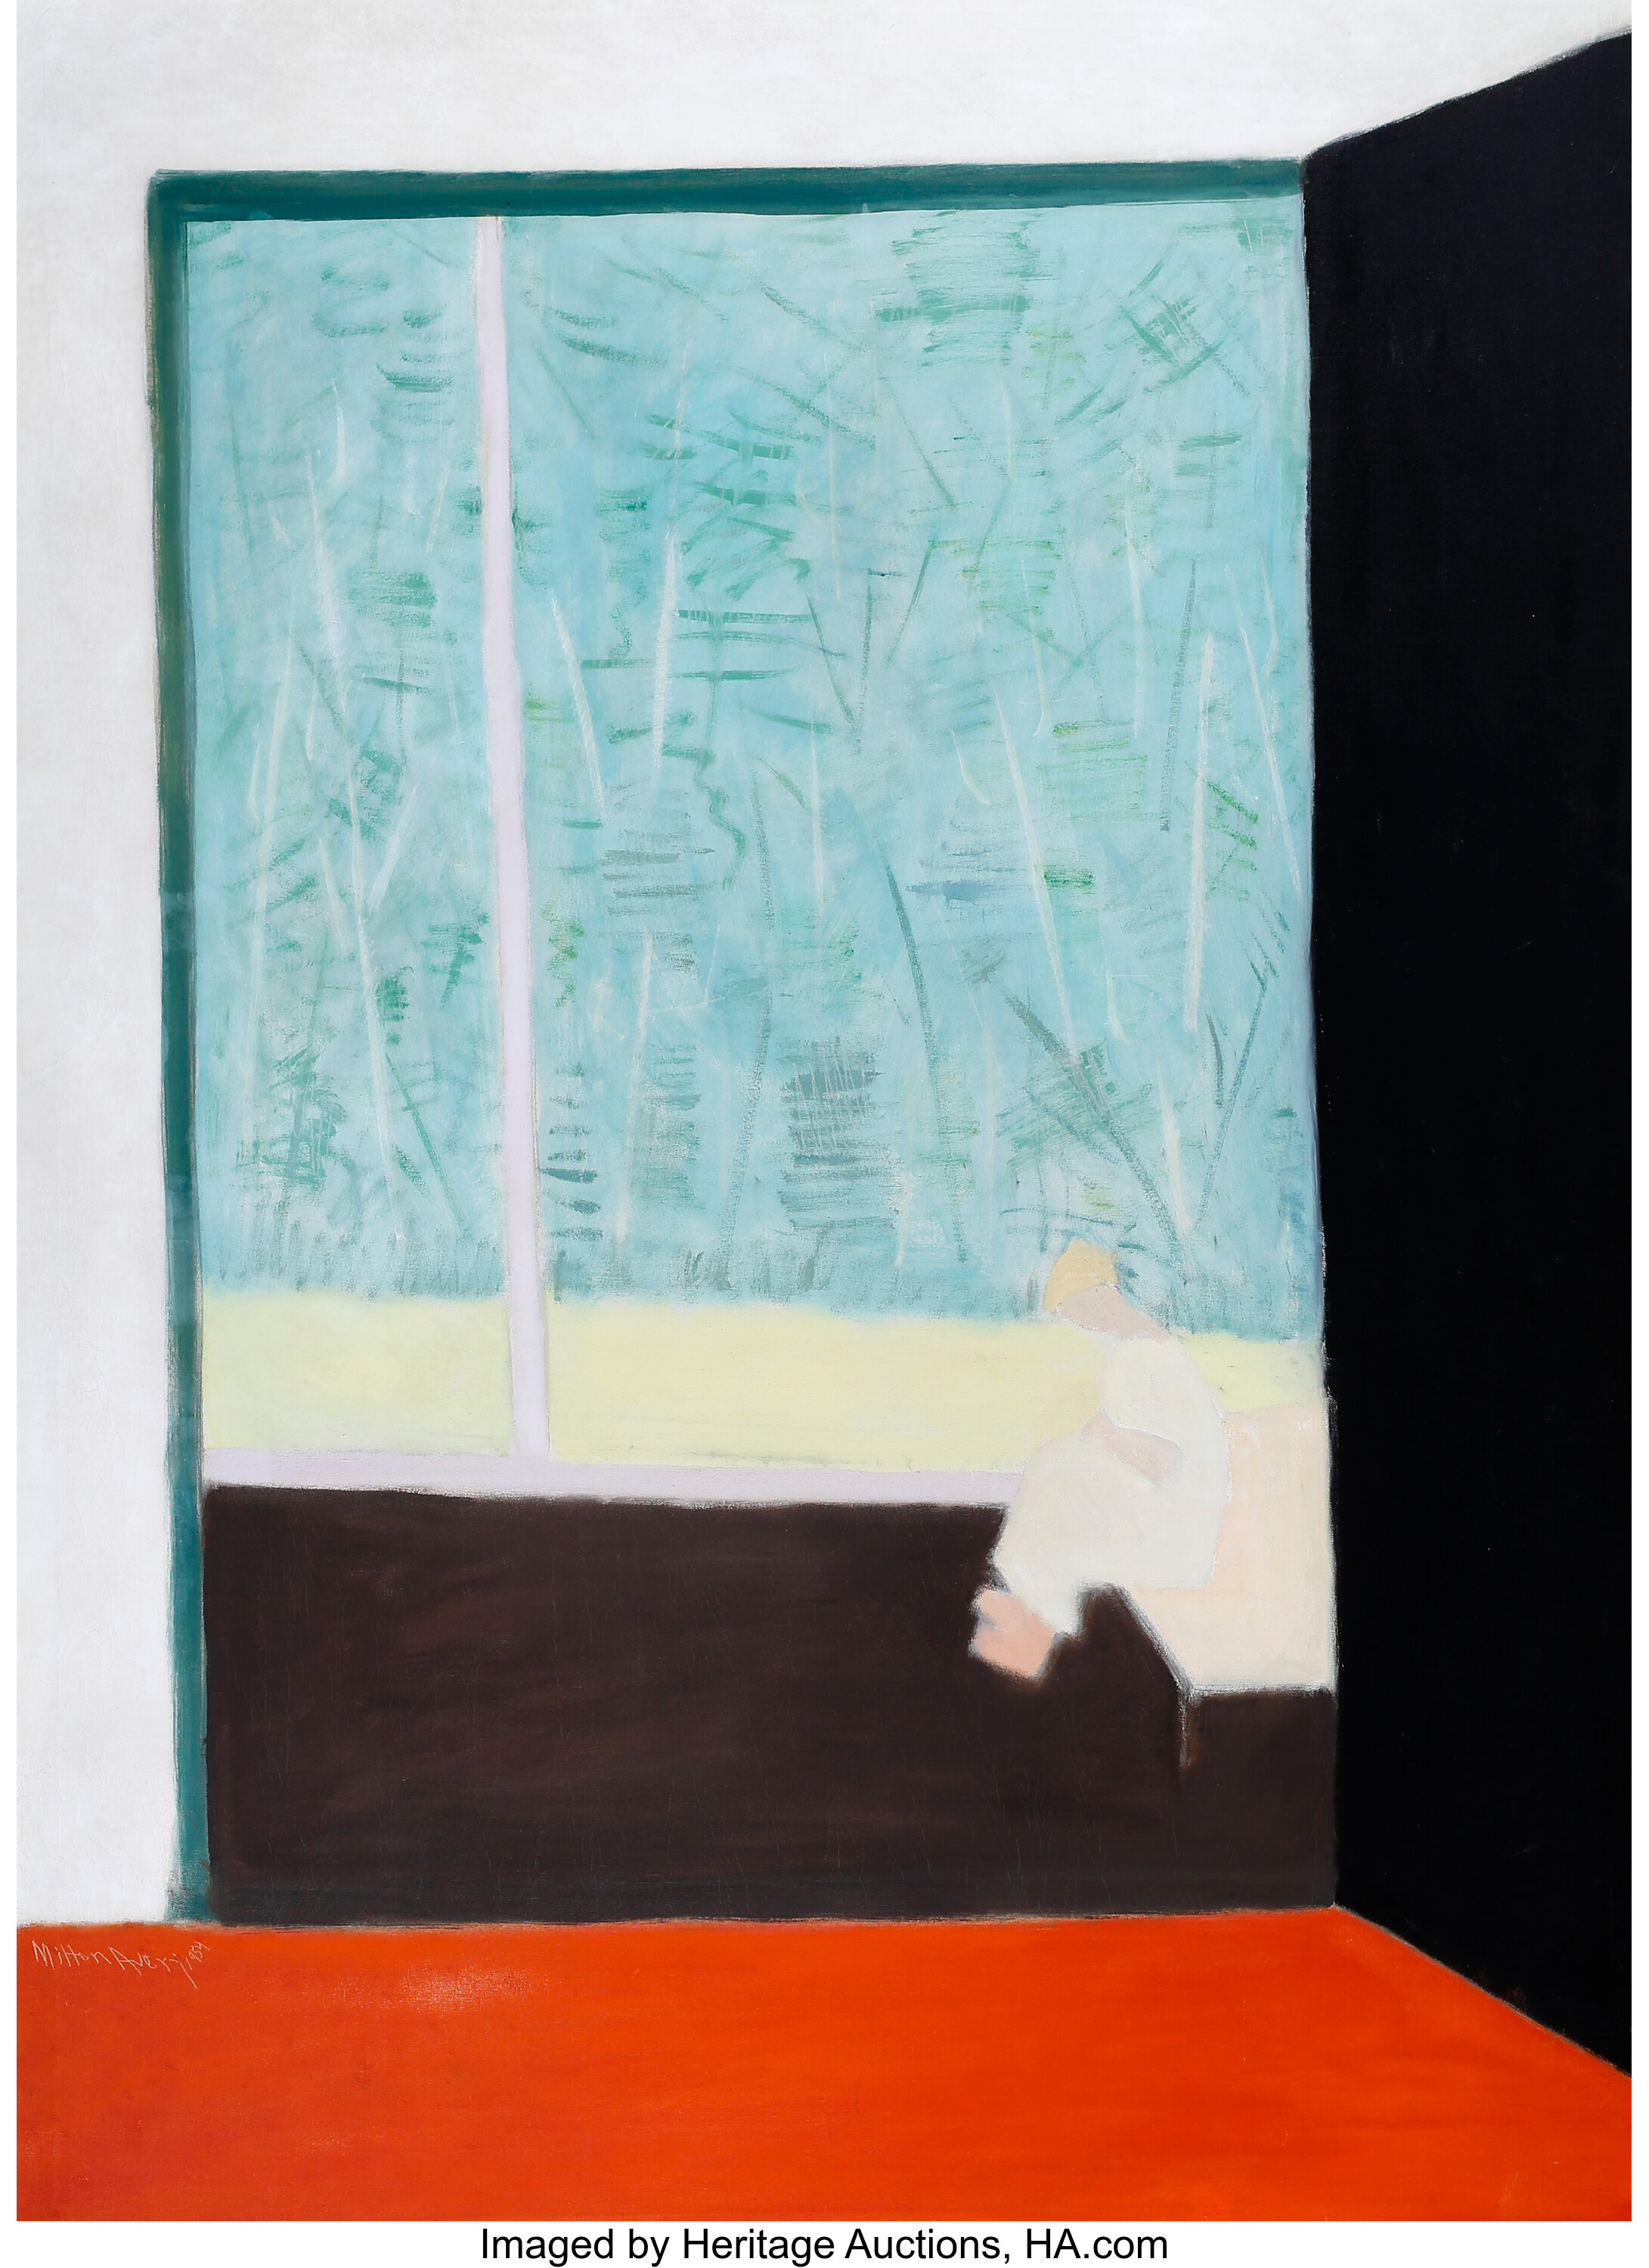 10 things to know about Milton Avery